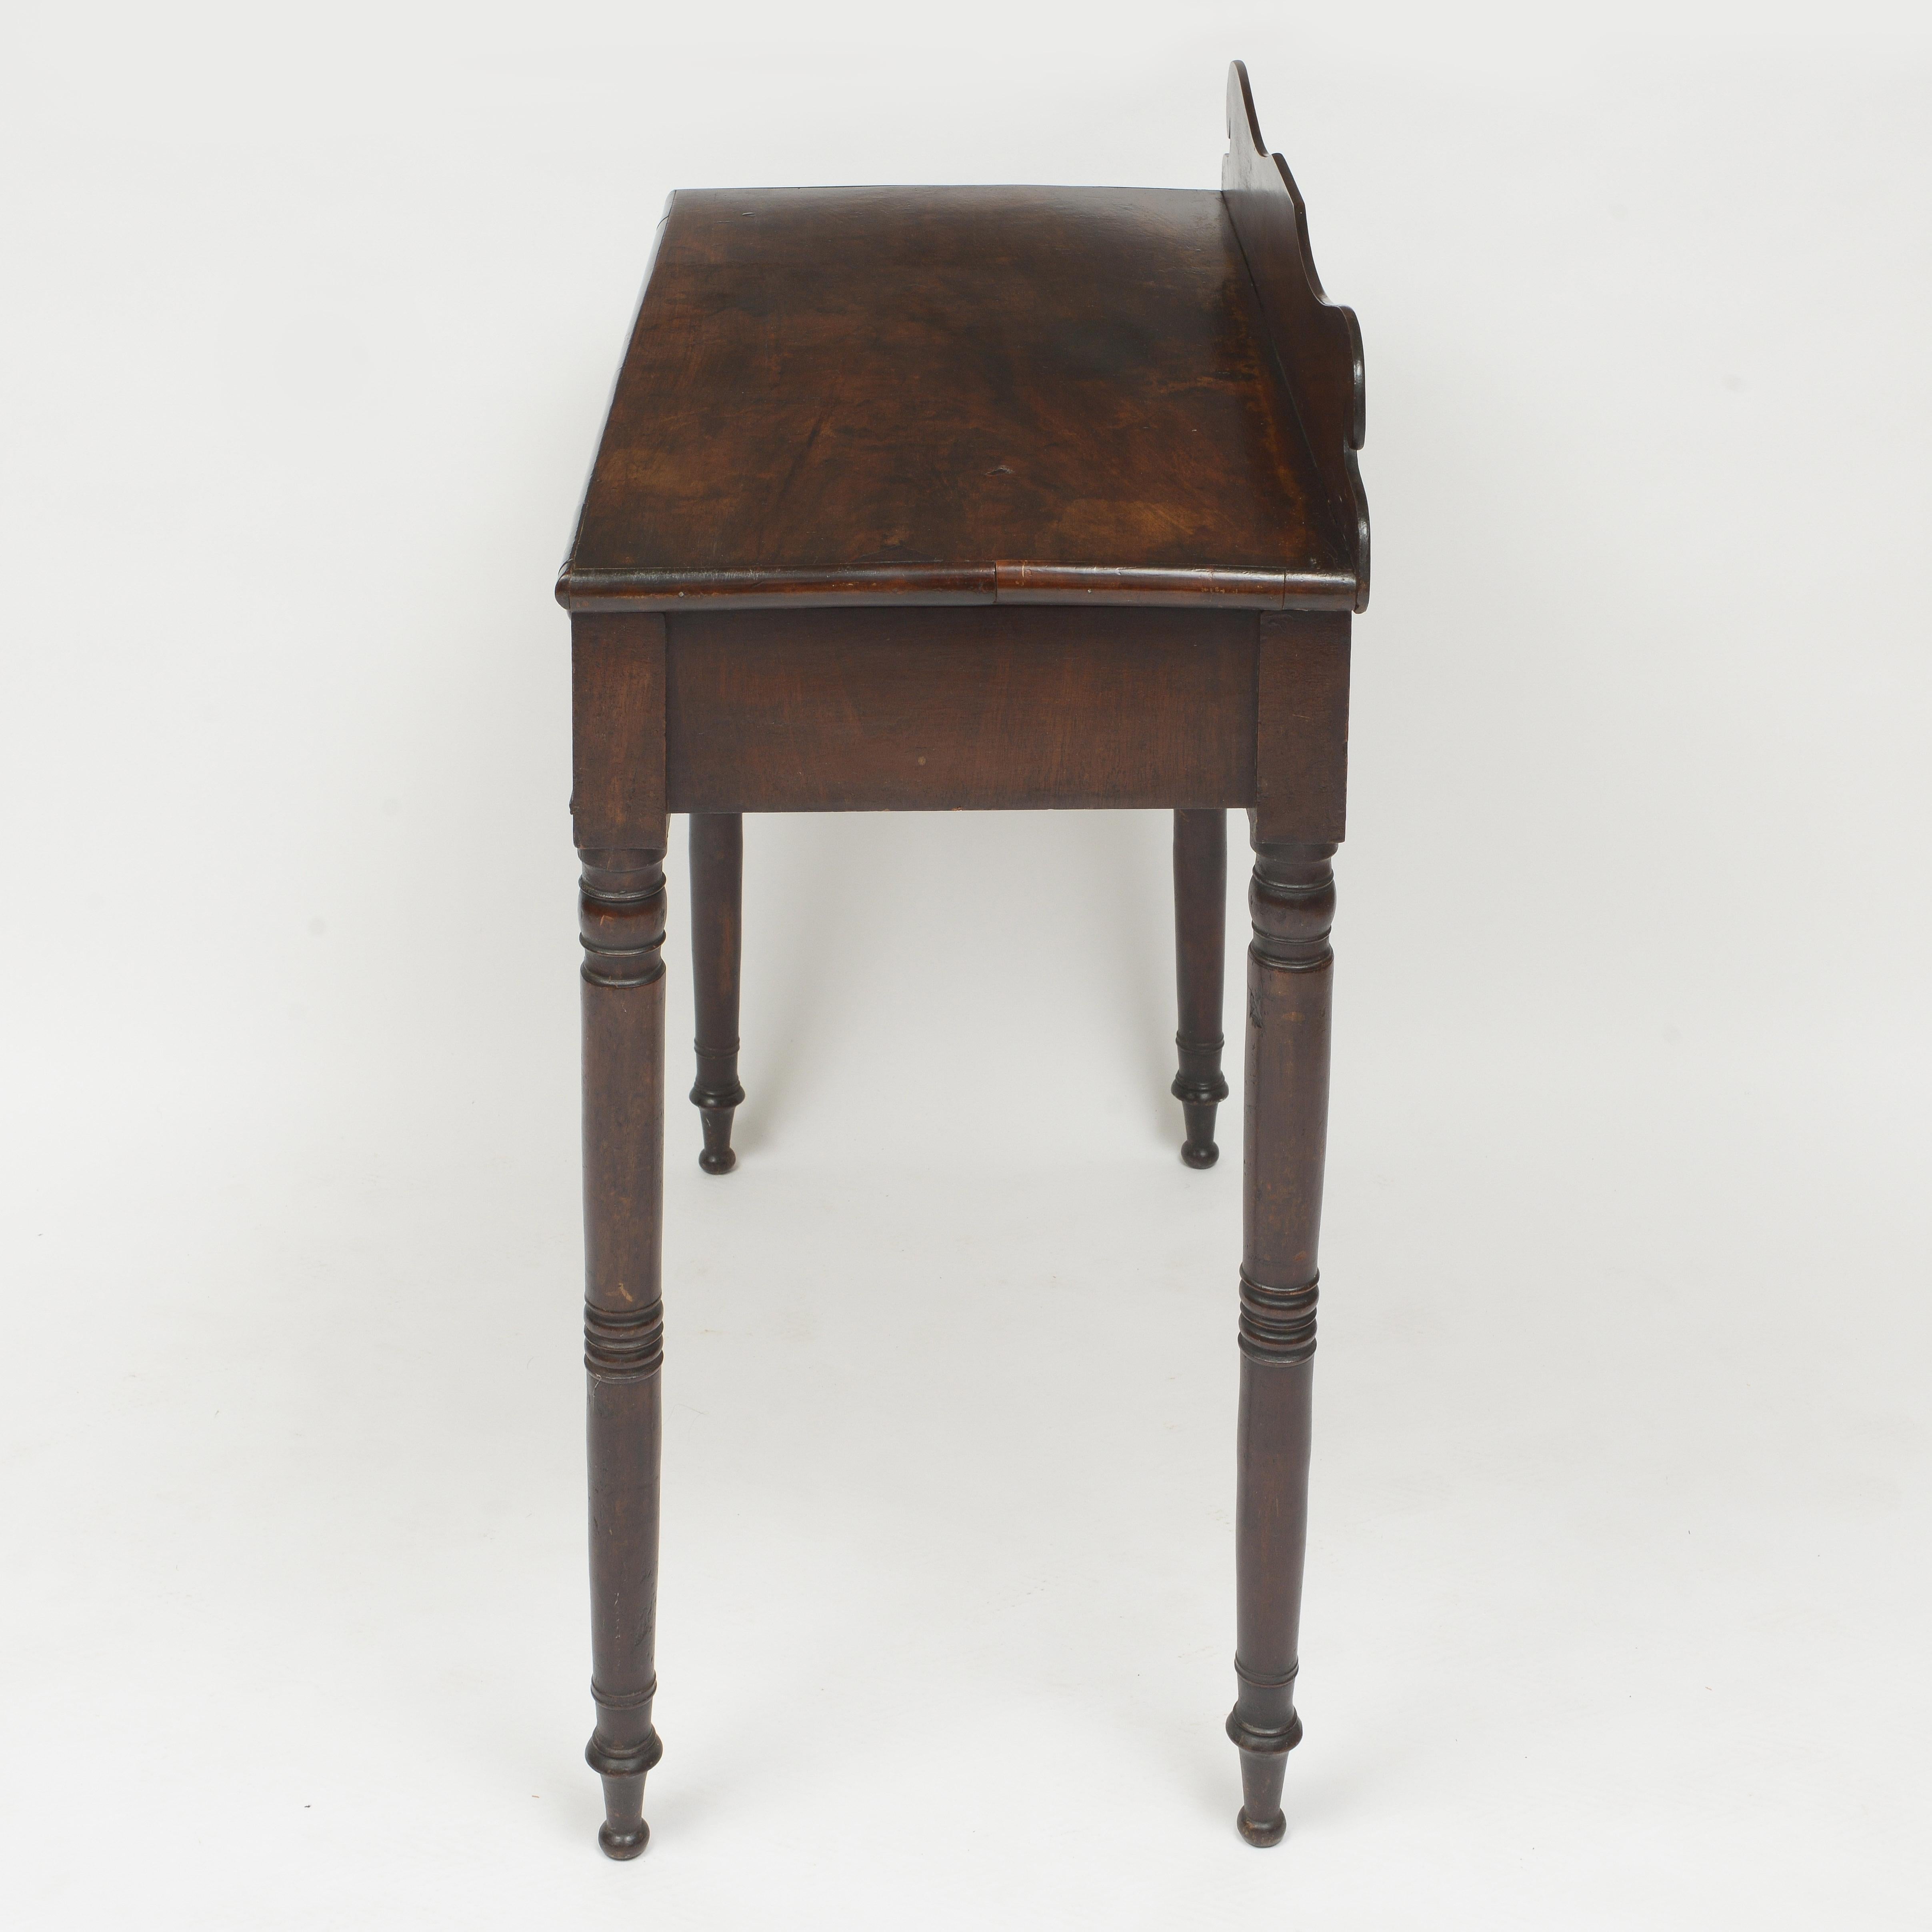 Hand-Crafted Mid 19th Century American Walnut Console Table With Single Drawer For Sale